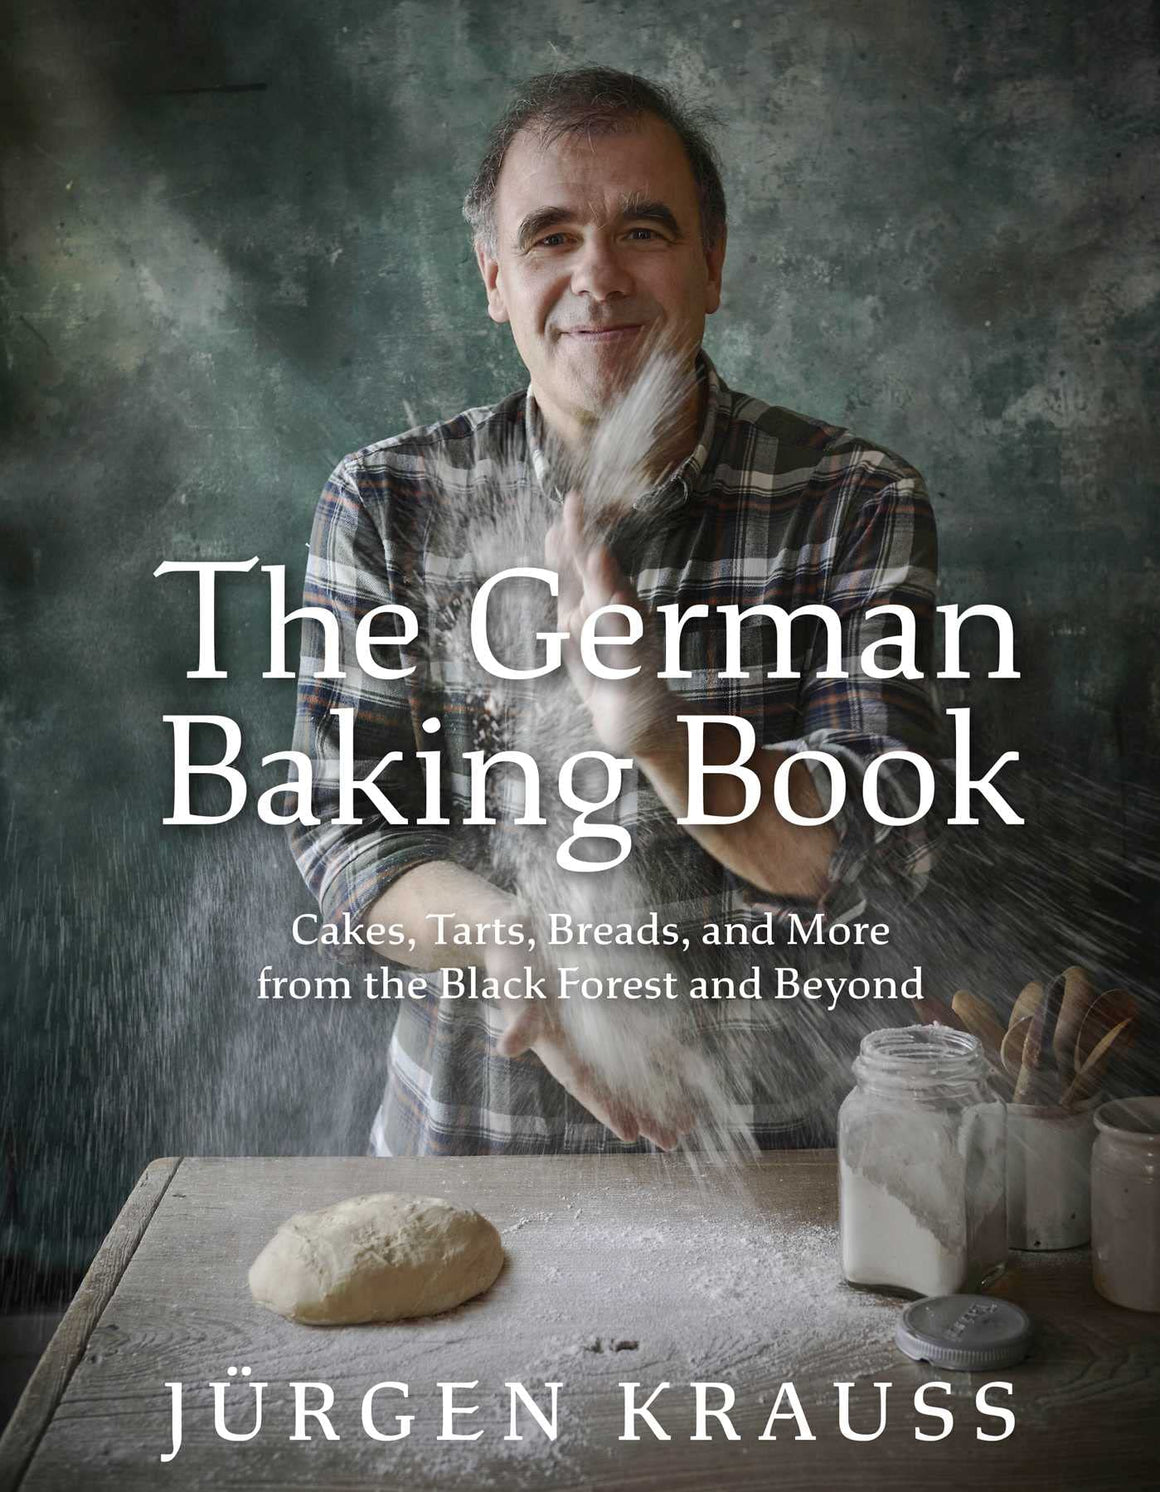 (*NEW ARRIVAL*) (Baking - German) Jurgen Krauss. The German Baking Book: Cakes, Tarts, Breads, and More from the Black Forest and Beyond.